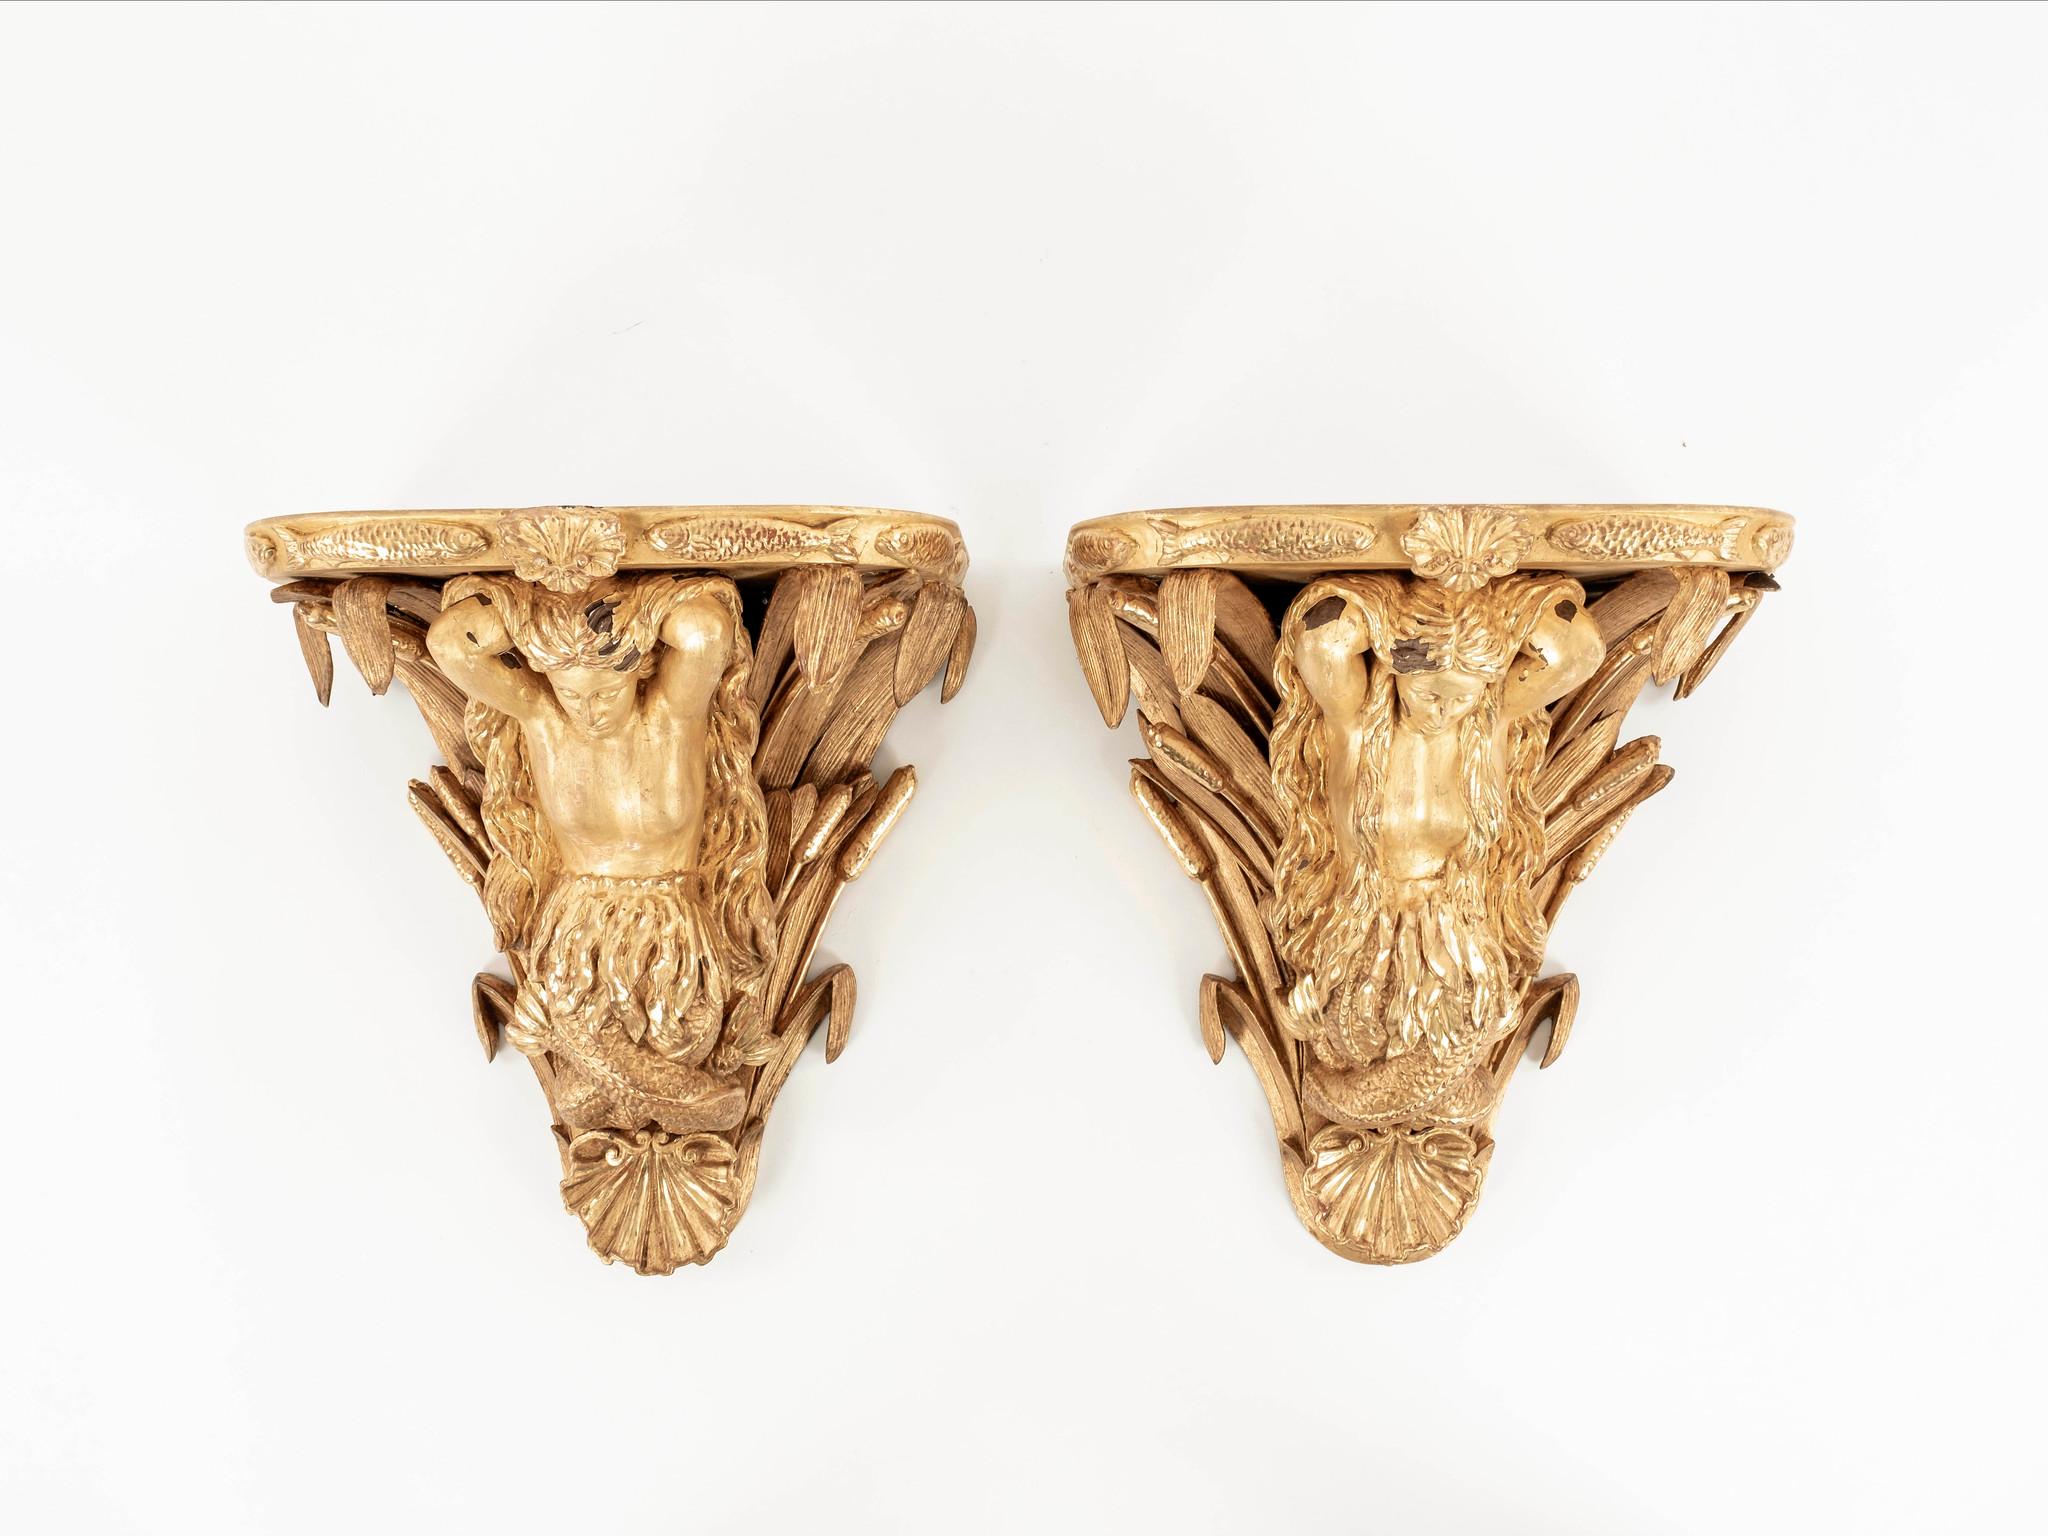 An exceptional detailed pair of mid-18th century George III giltwood wall shelves featuring mermaids with long flowing hair, spikes of cattails, shell cartouches and fish border along edge.
 